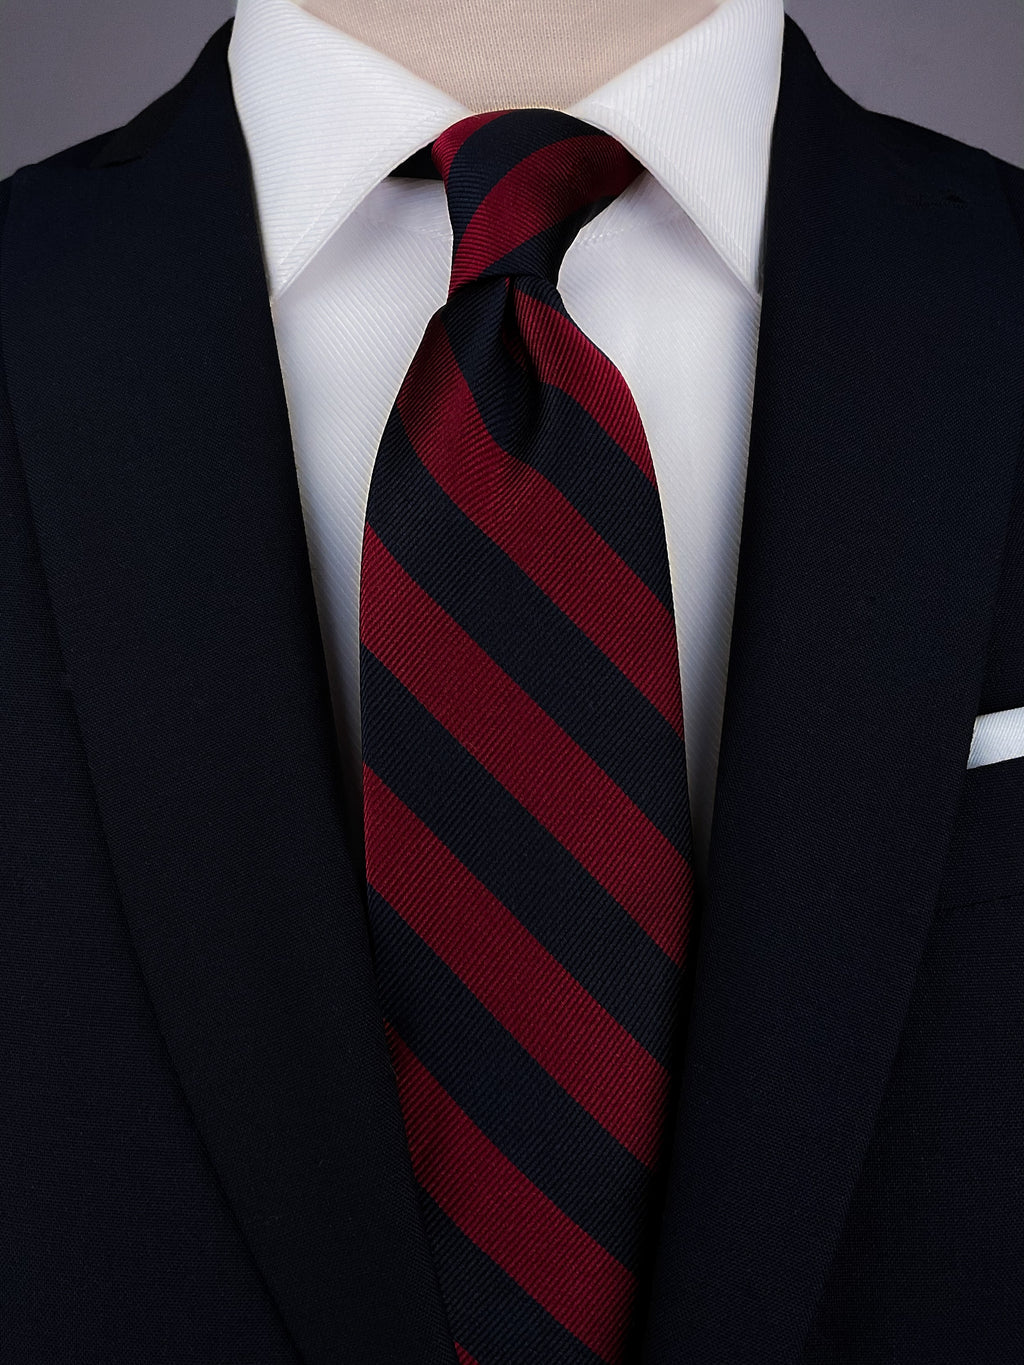 Red and Navy Blue Striped Silk Regimental tie worn with a white shirt and a navy blue suit